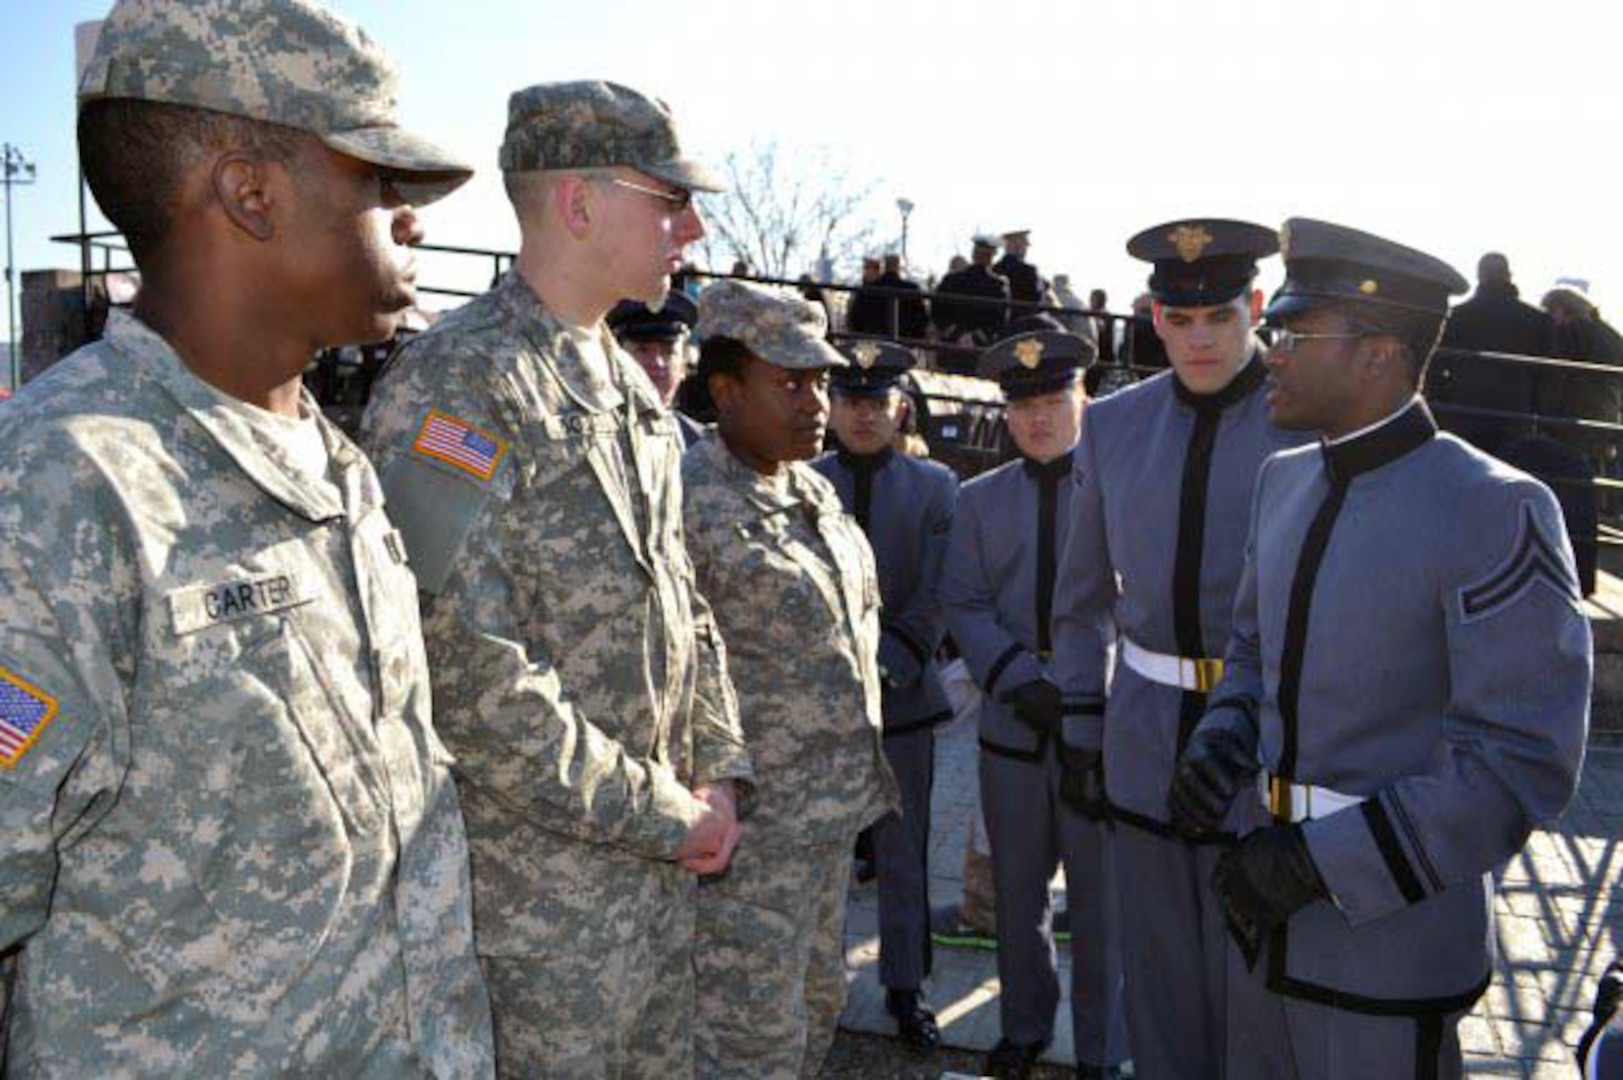 New York Army National Guard Spc. Naseer Carter, Pfc. Douglas Dolan and Pvt. Rebecca Rousseau listen to West Point Cadet Sgt. Jordan Lee of Queens, N.Y., as he explains his experiences at the academy.